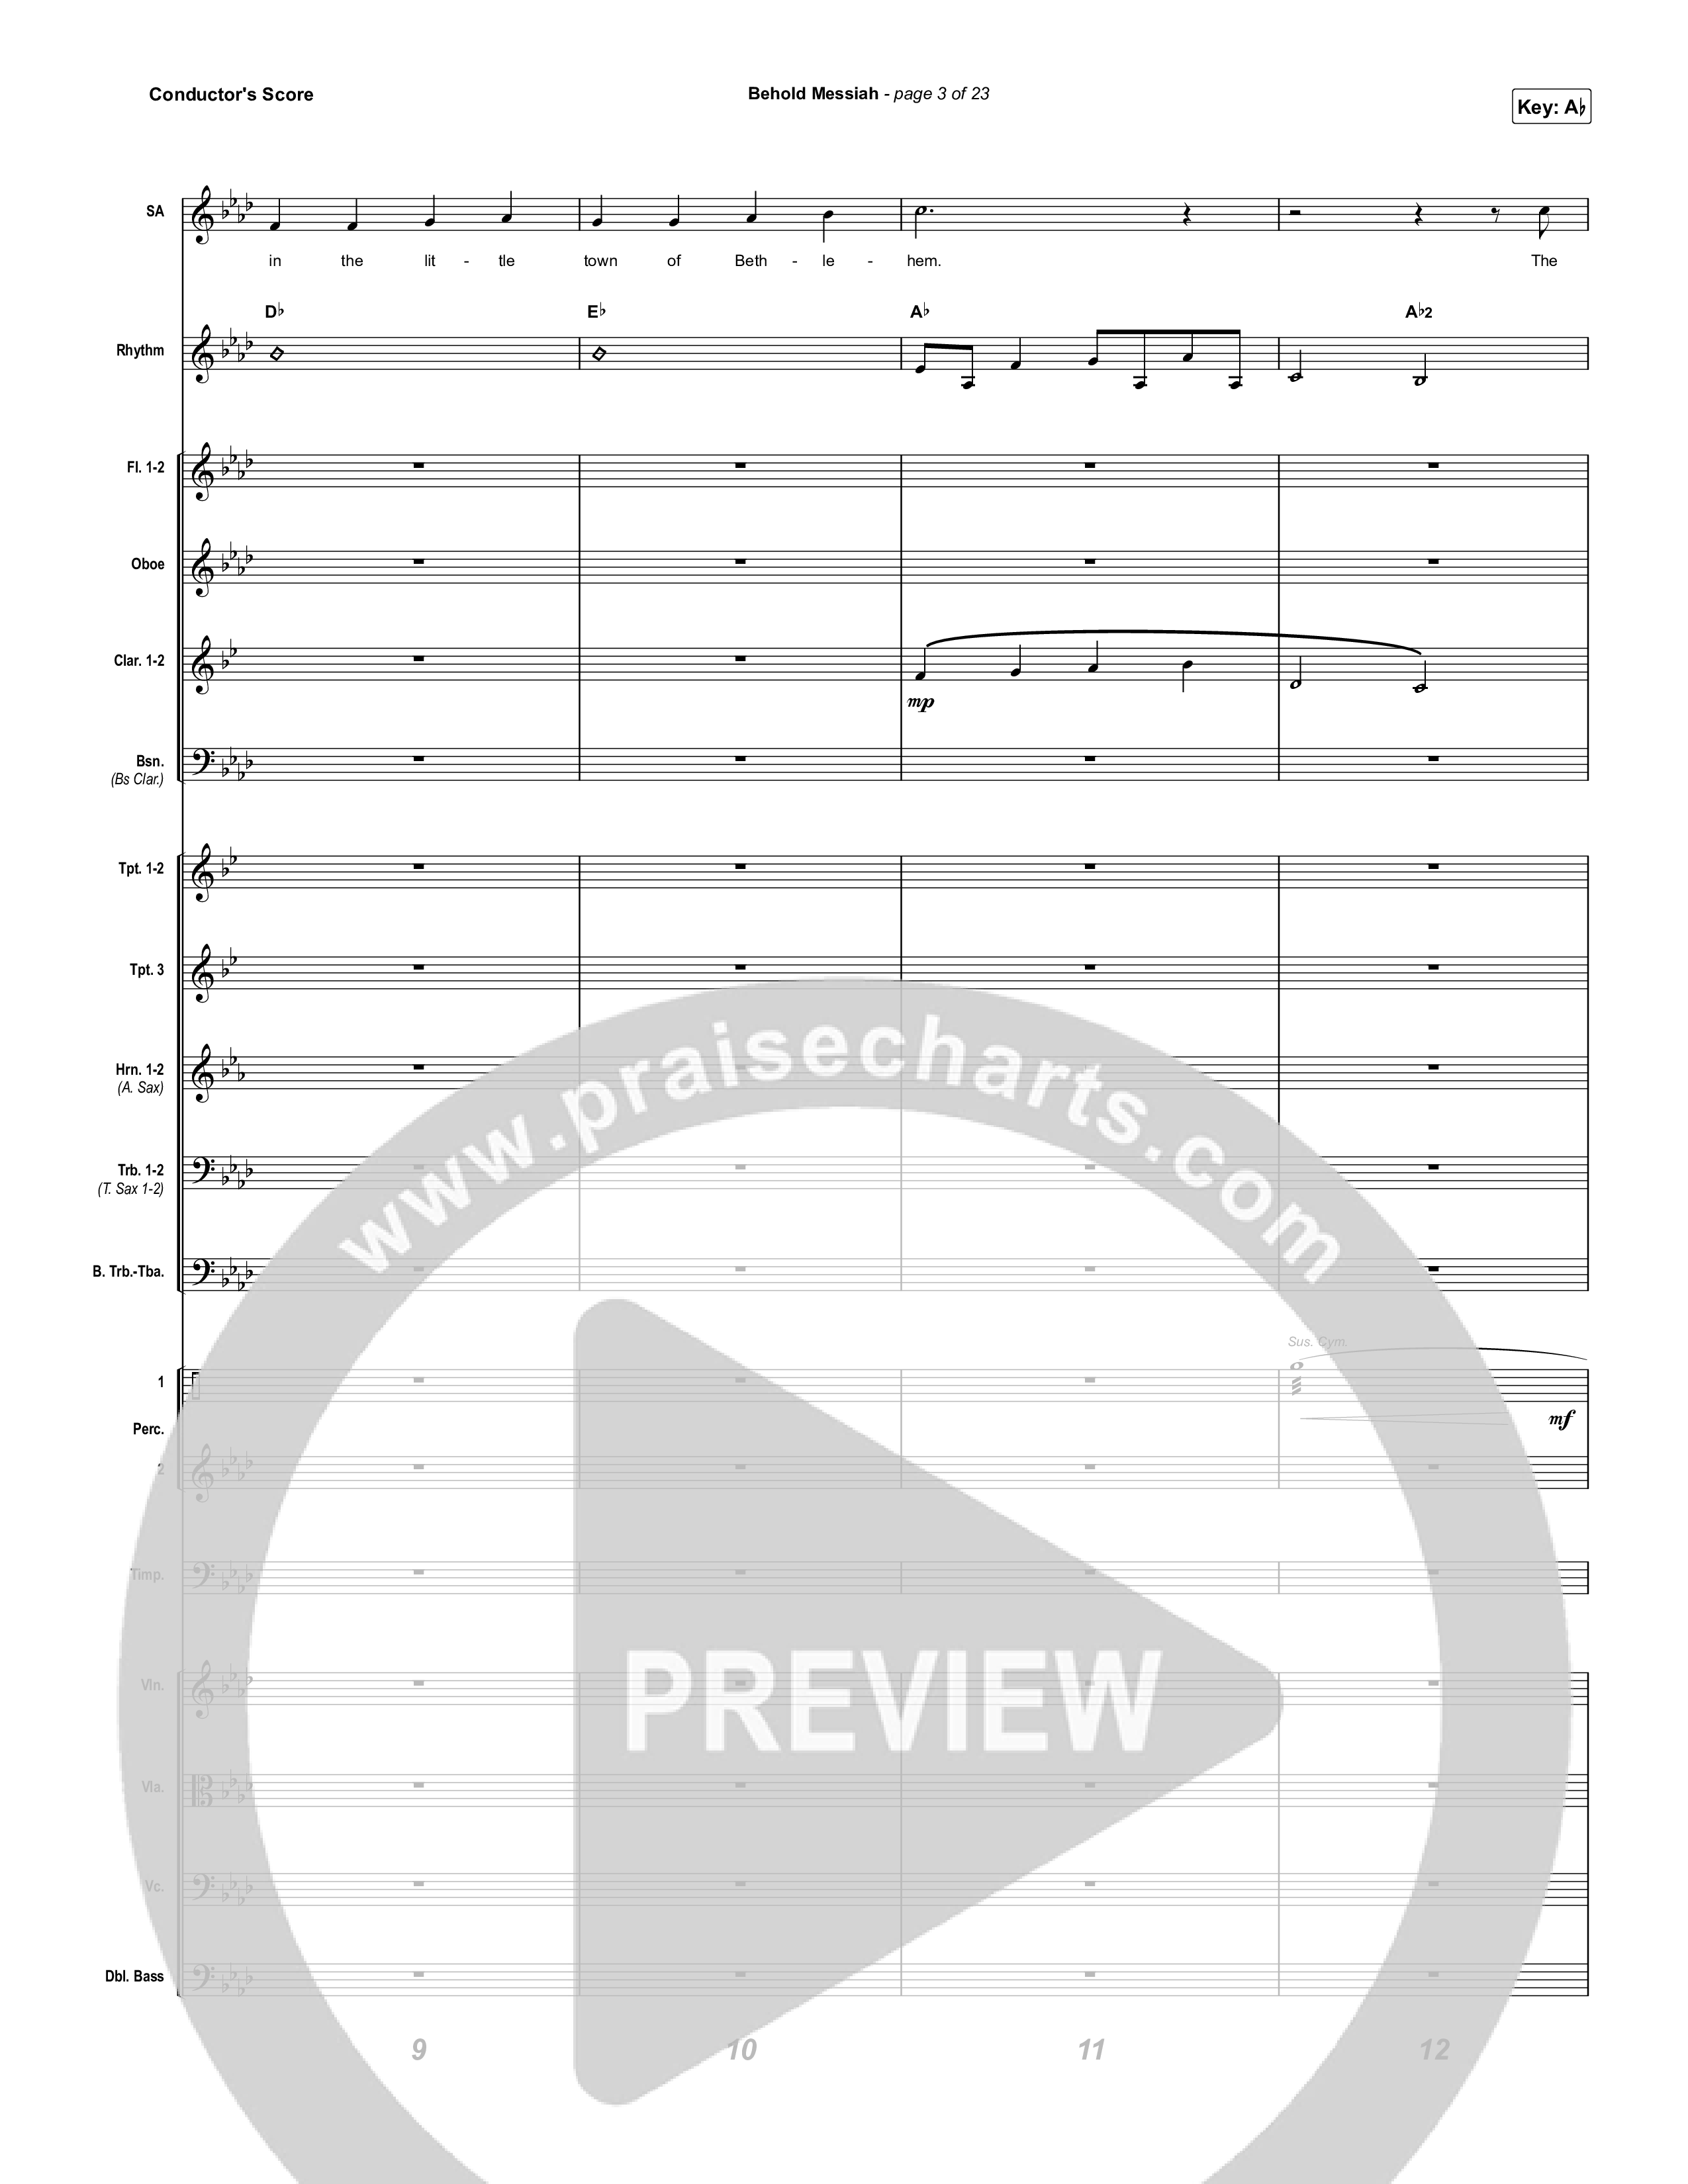 Behold Messiah Conductor's Score (River Valley Worship)